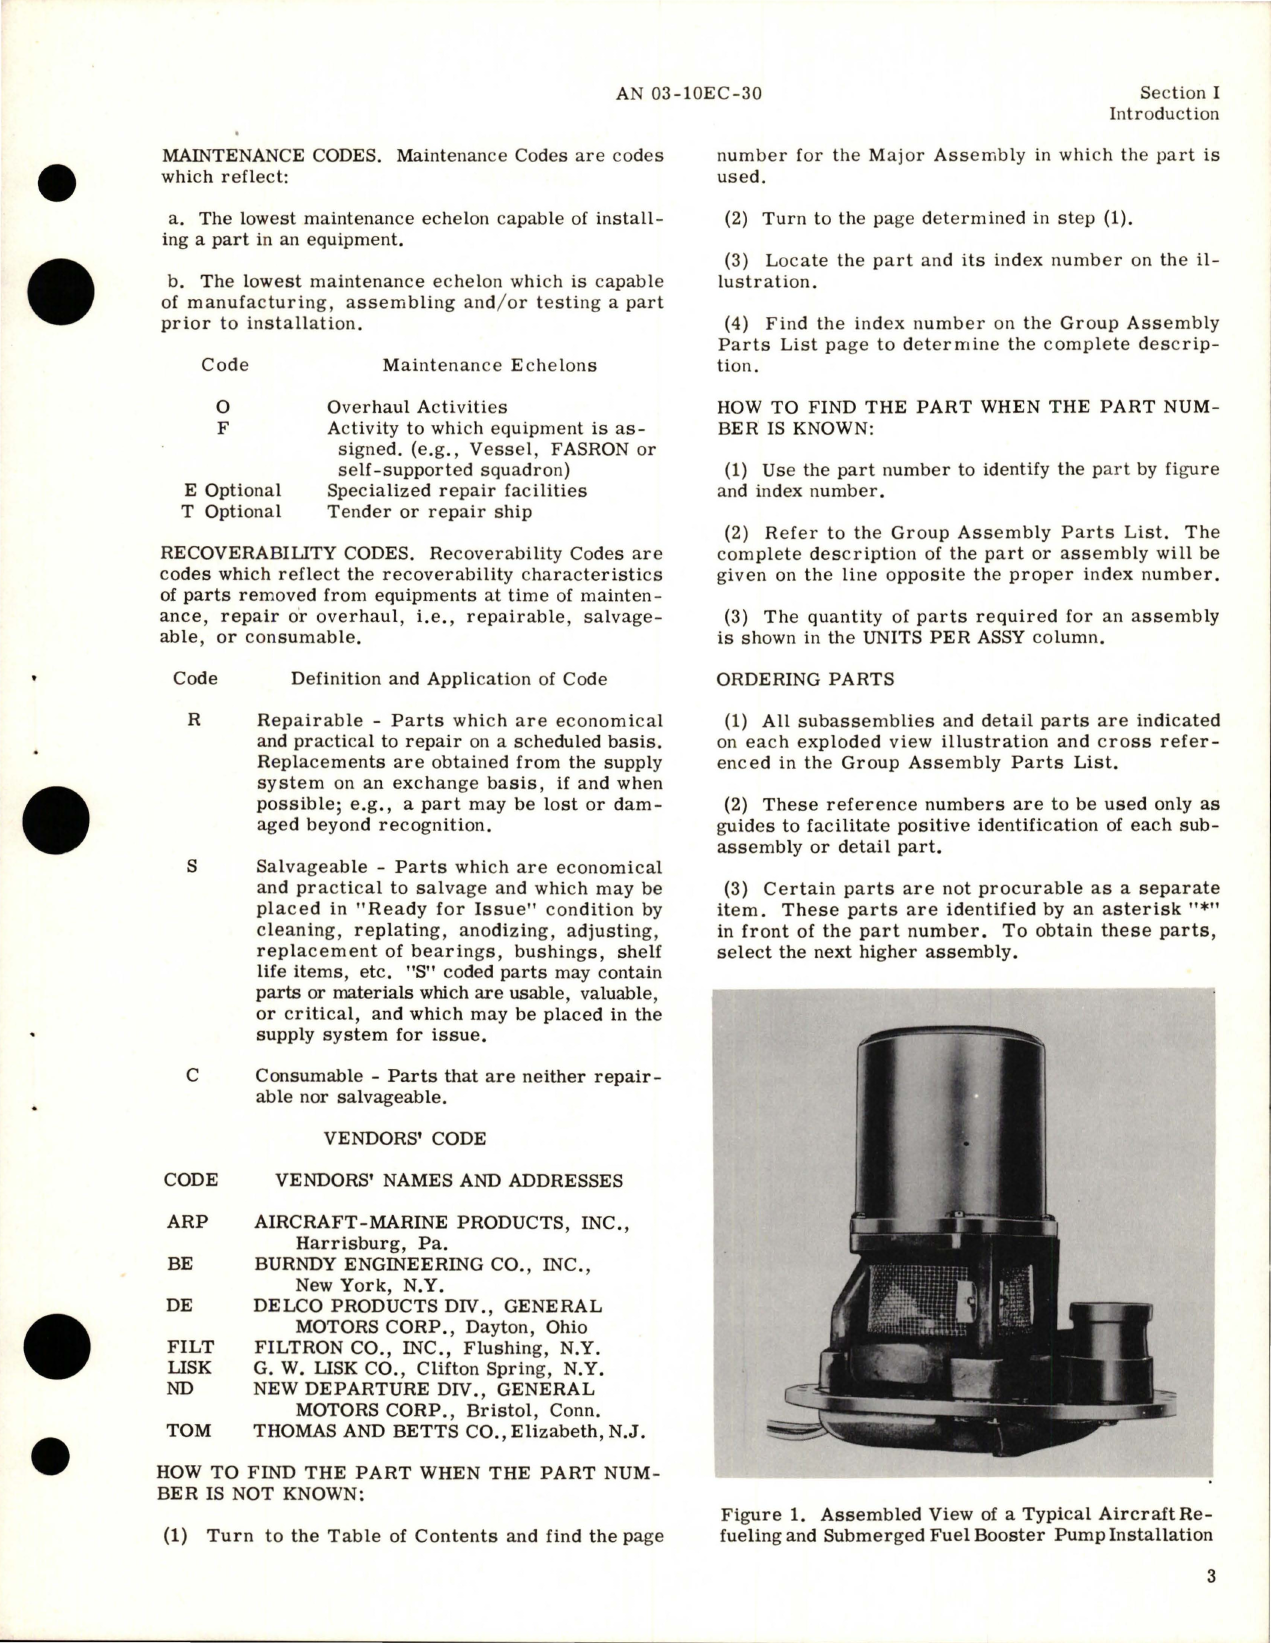 Sample page 5 from AirCorps Library document: Illustrated Parts Breakdown for Refueling & Booster Pumps